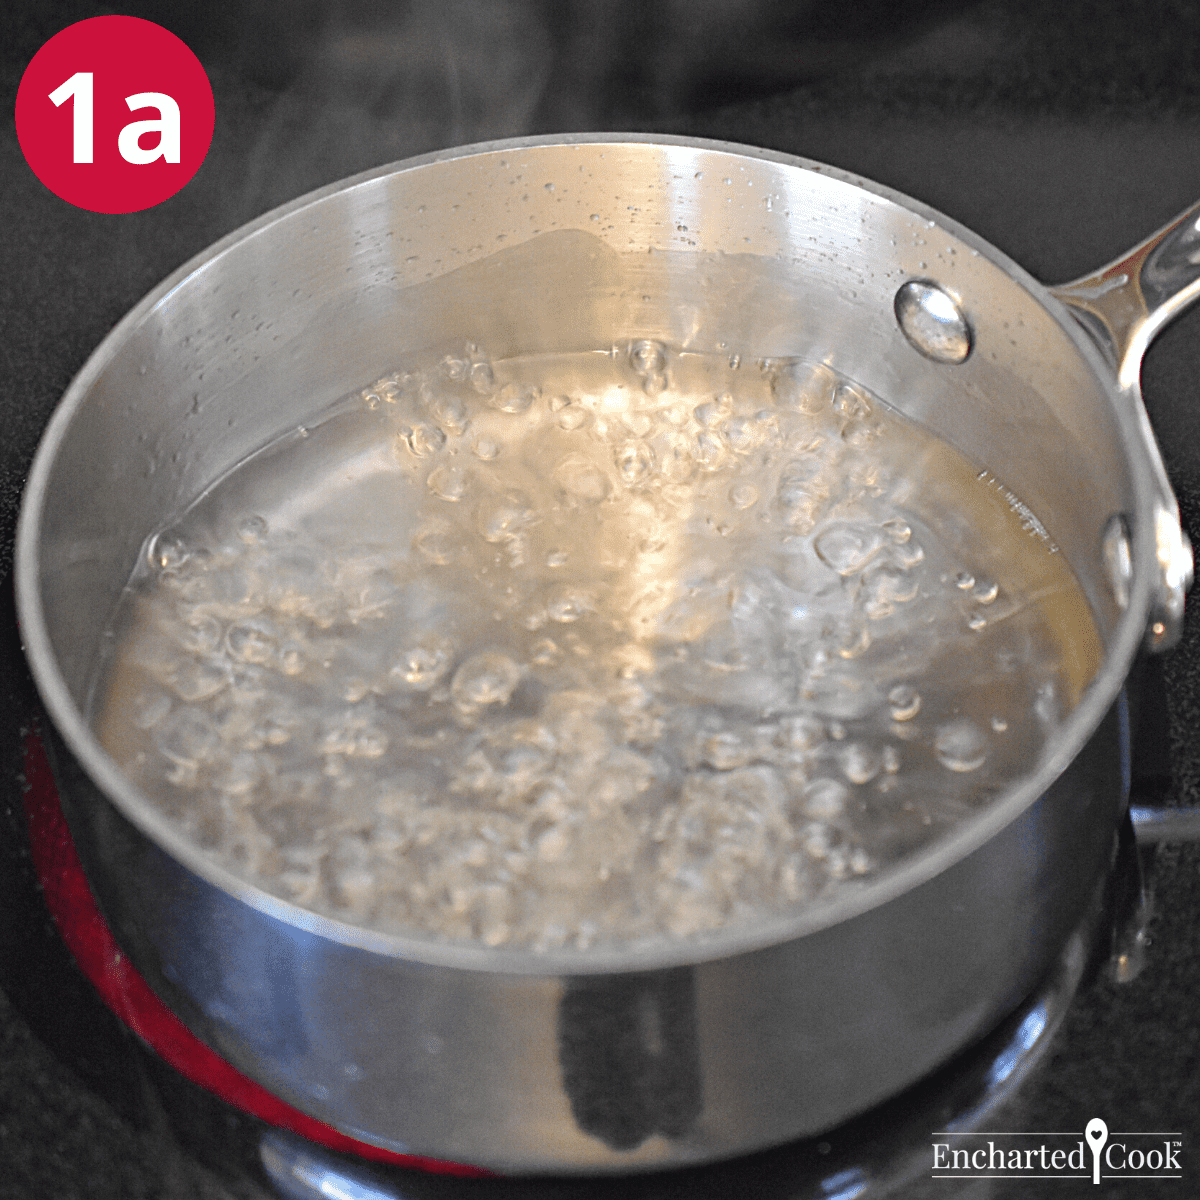 Water, sugar, and salt simmered in a pan.